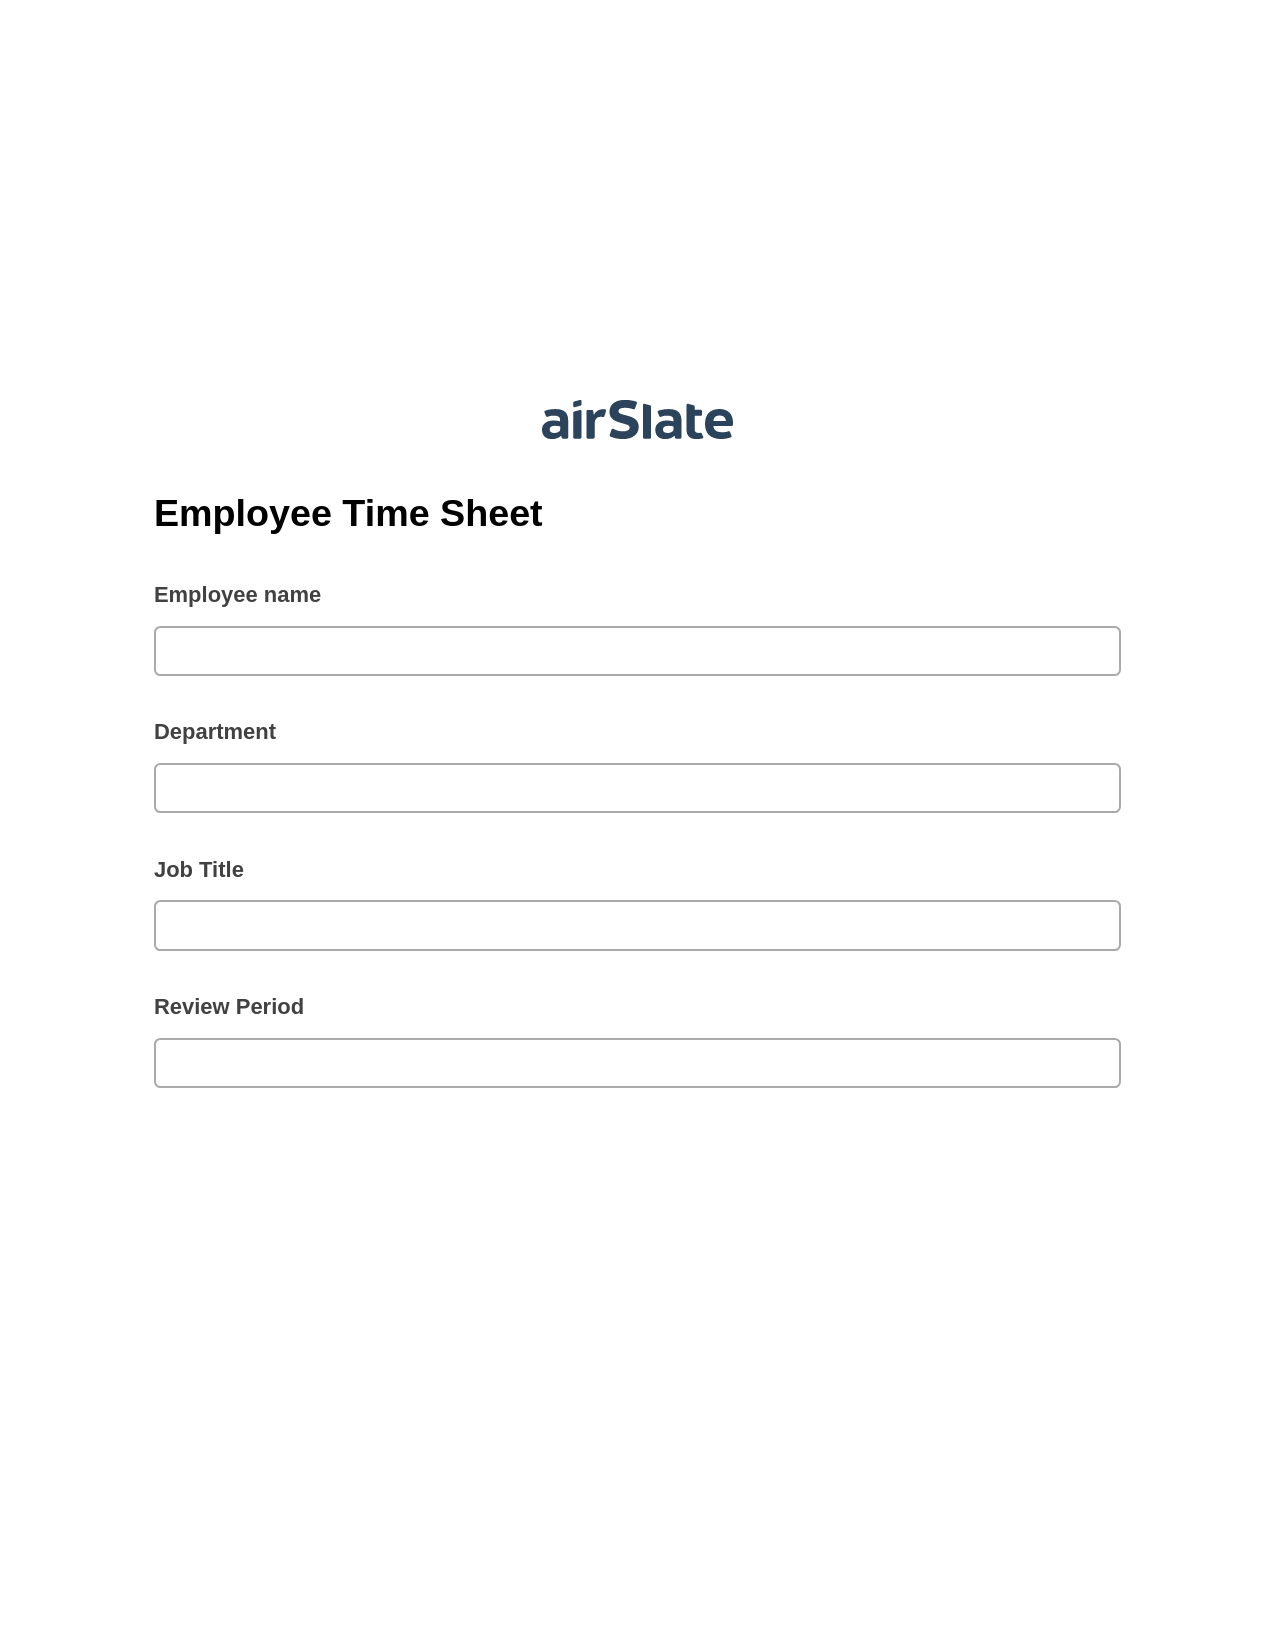 Multirole Employee Time Sheet Pre-fill Dropdowns from Airtable, Create Salesforce Records Bot, Slack Two-Way Binding Bot